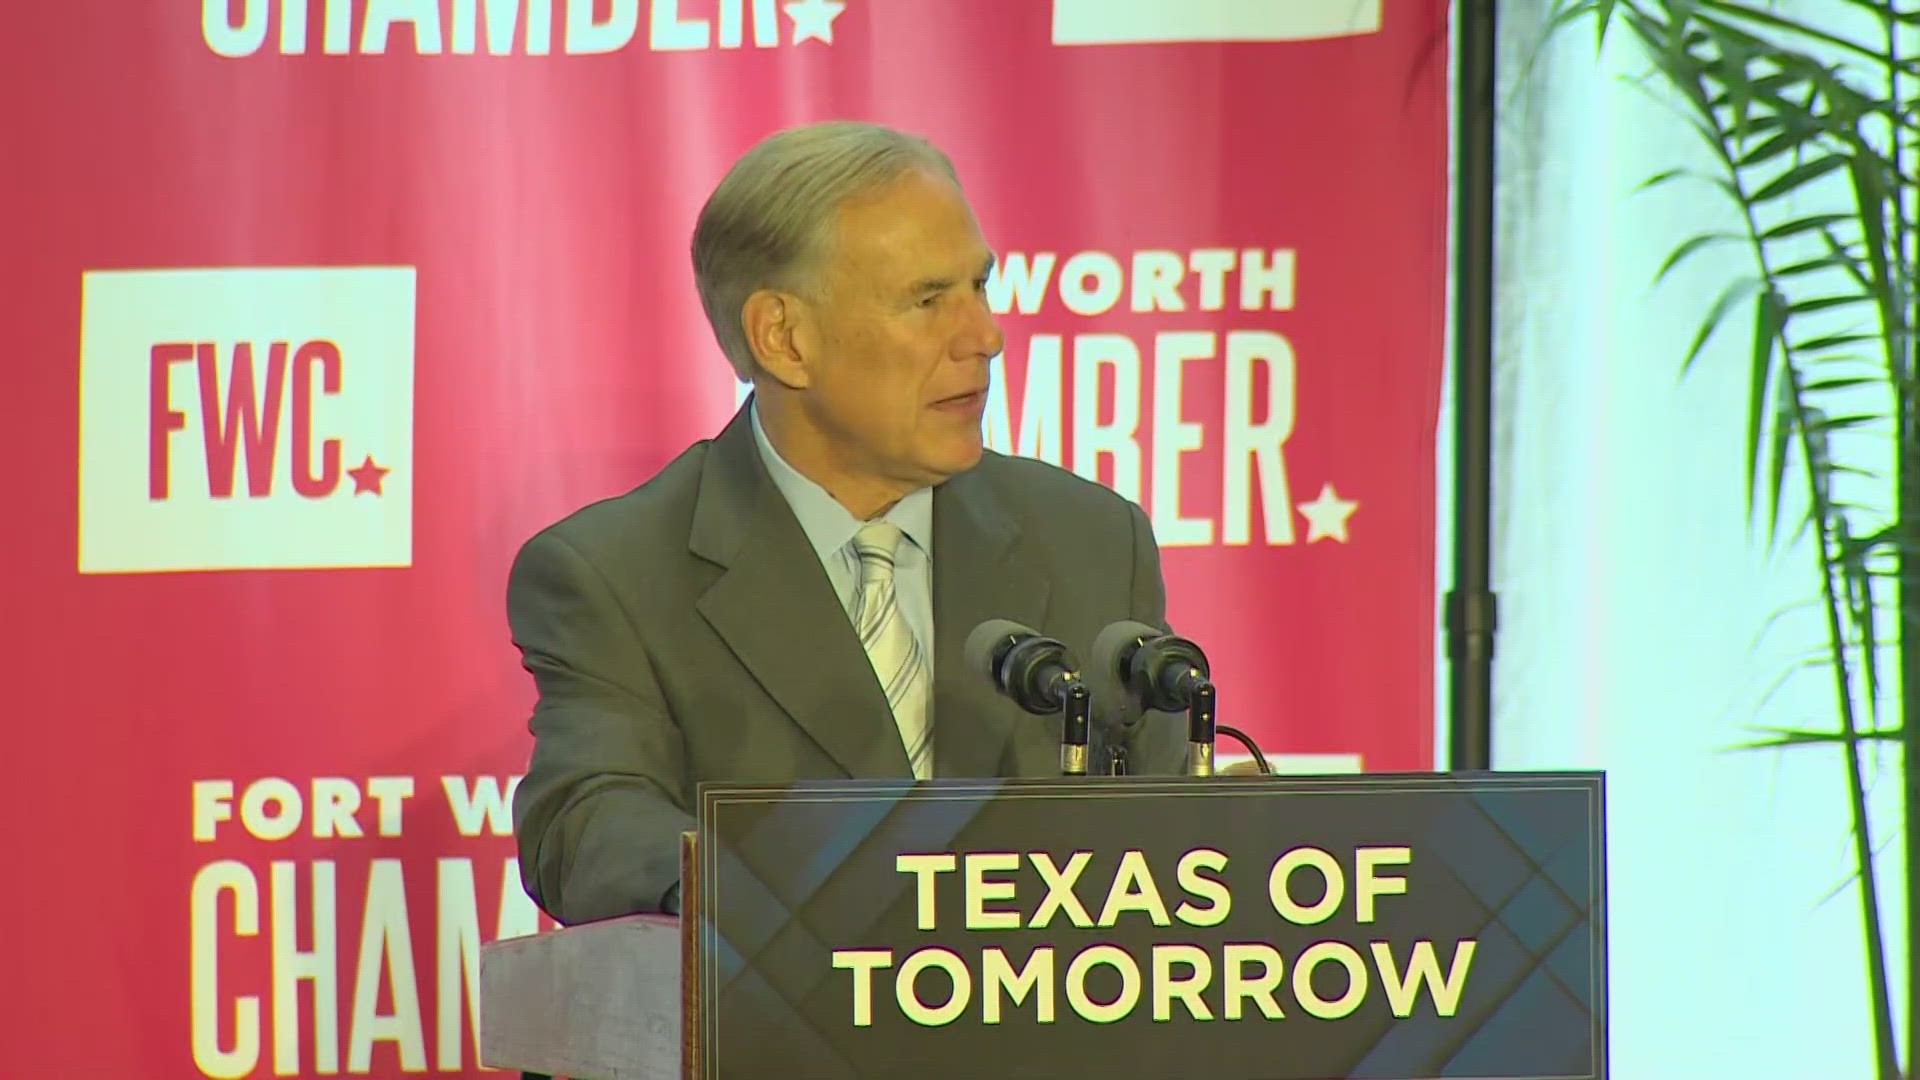 "I know that as great as Fort Worth is, this is just the beginning of what it can be," said Abbott.